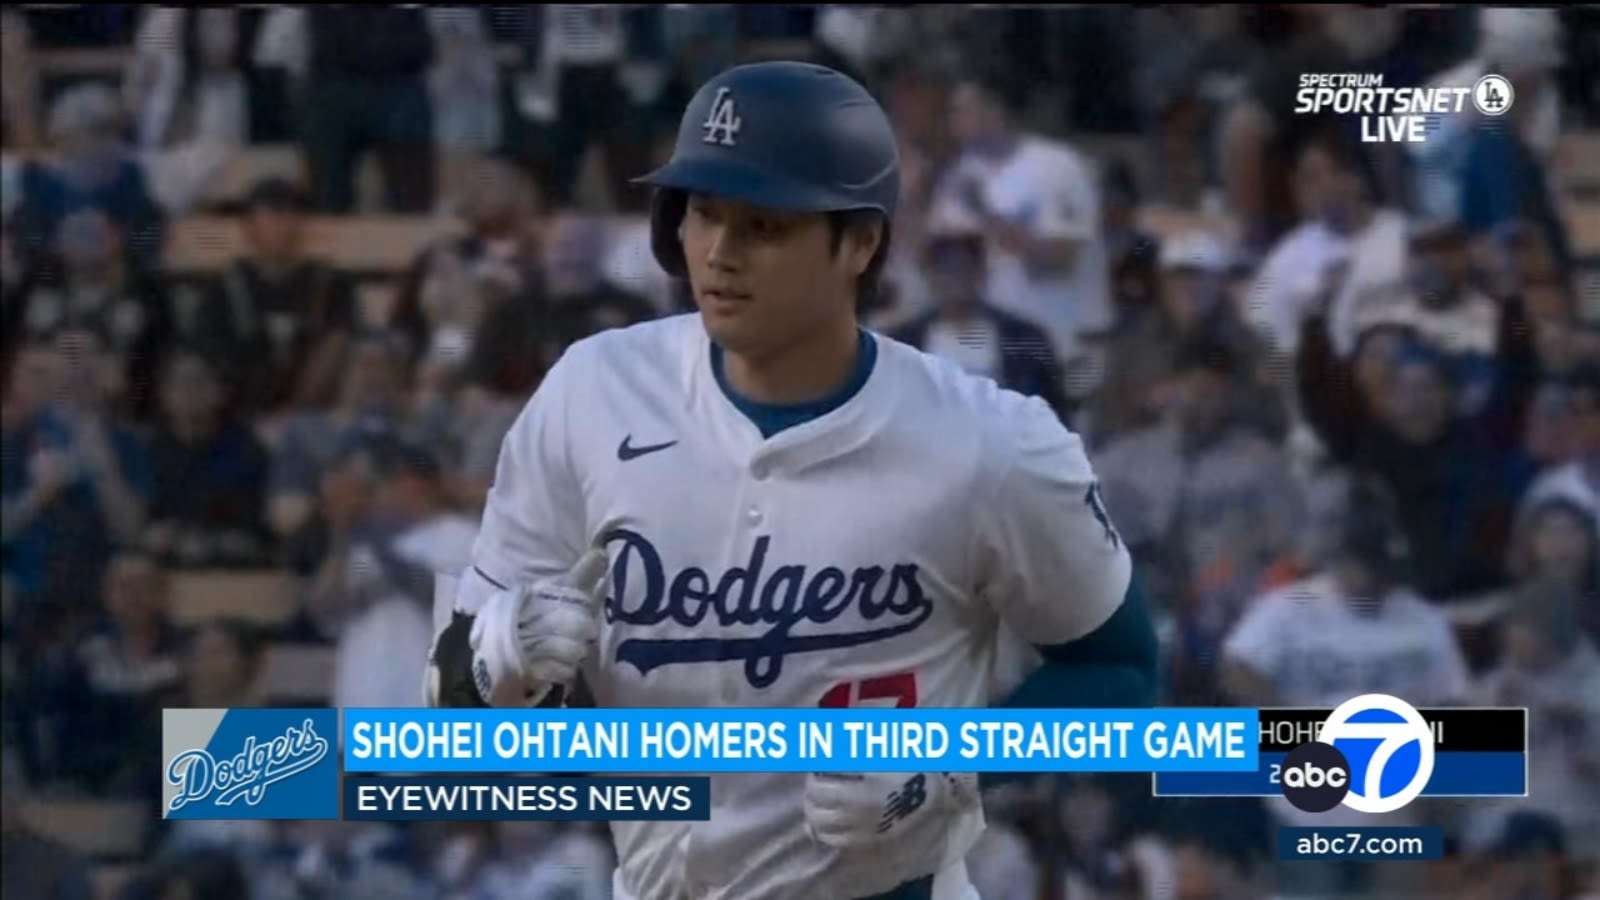 Ohtani on power surge after hitting homers in 3 straight games, leading league at 11 overall